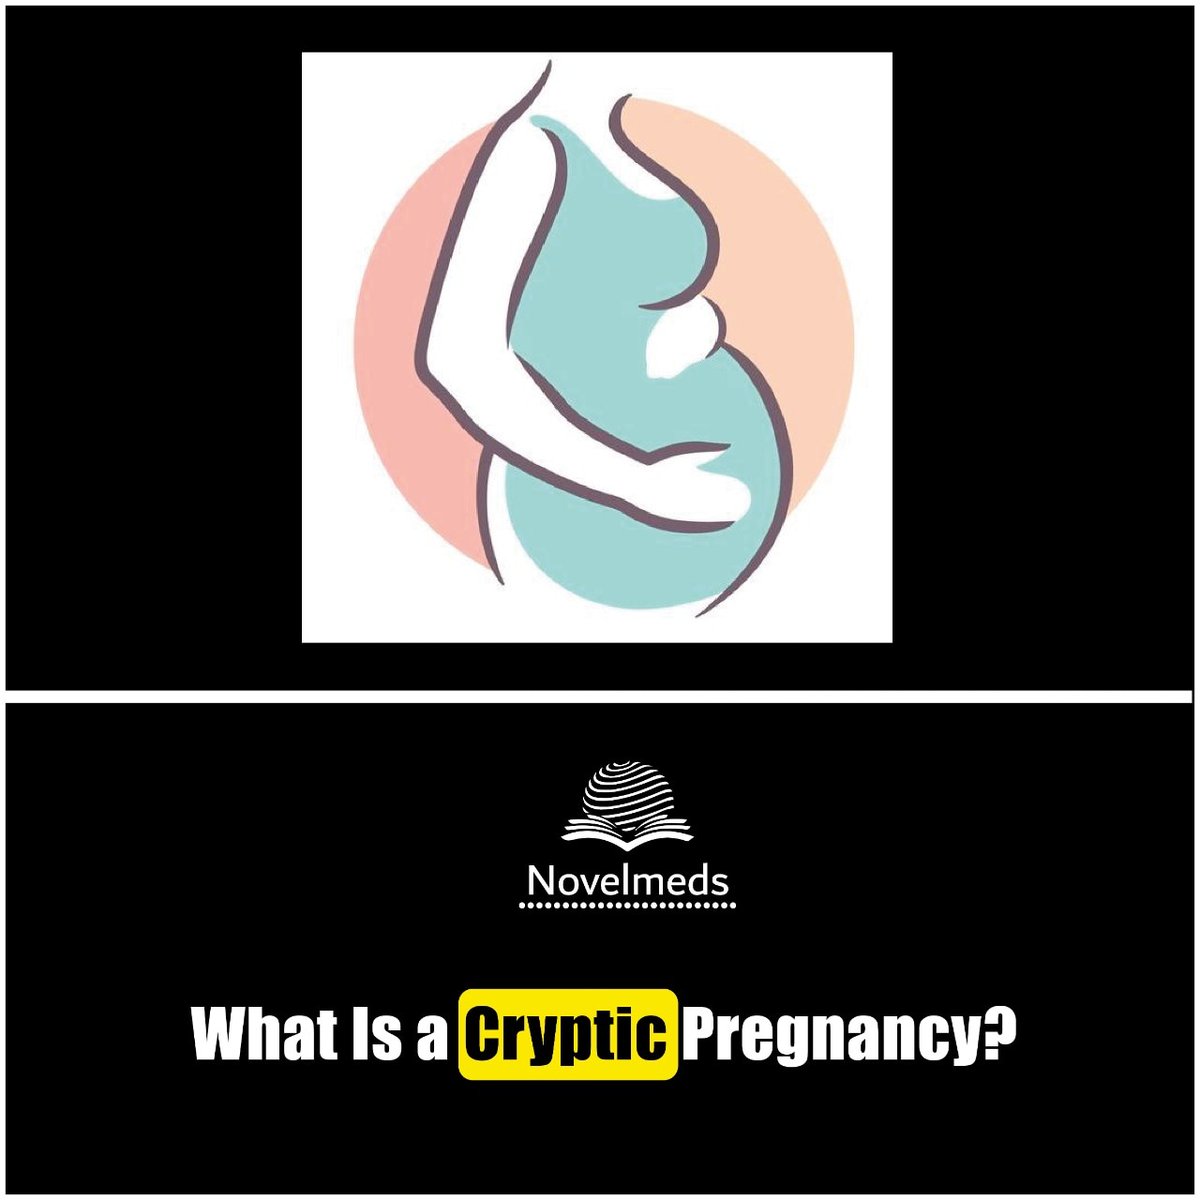 A #cryptic pregnancy occurs when a woman discovers she is pregnant only halfway through the #pregnancy, or even right up until #labor. It's possible that they experience negligible or nonexistent pregnancy #symptoms, including no #baby bump.

#NovelMeds #CrypticPregnancy